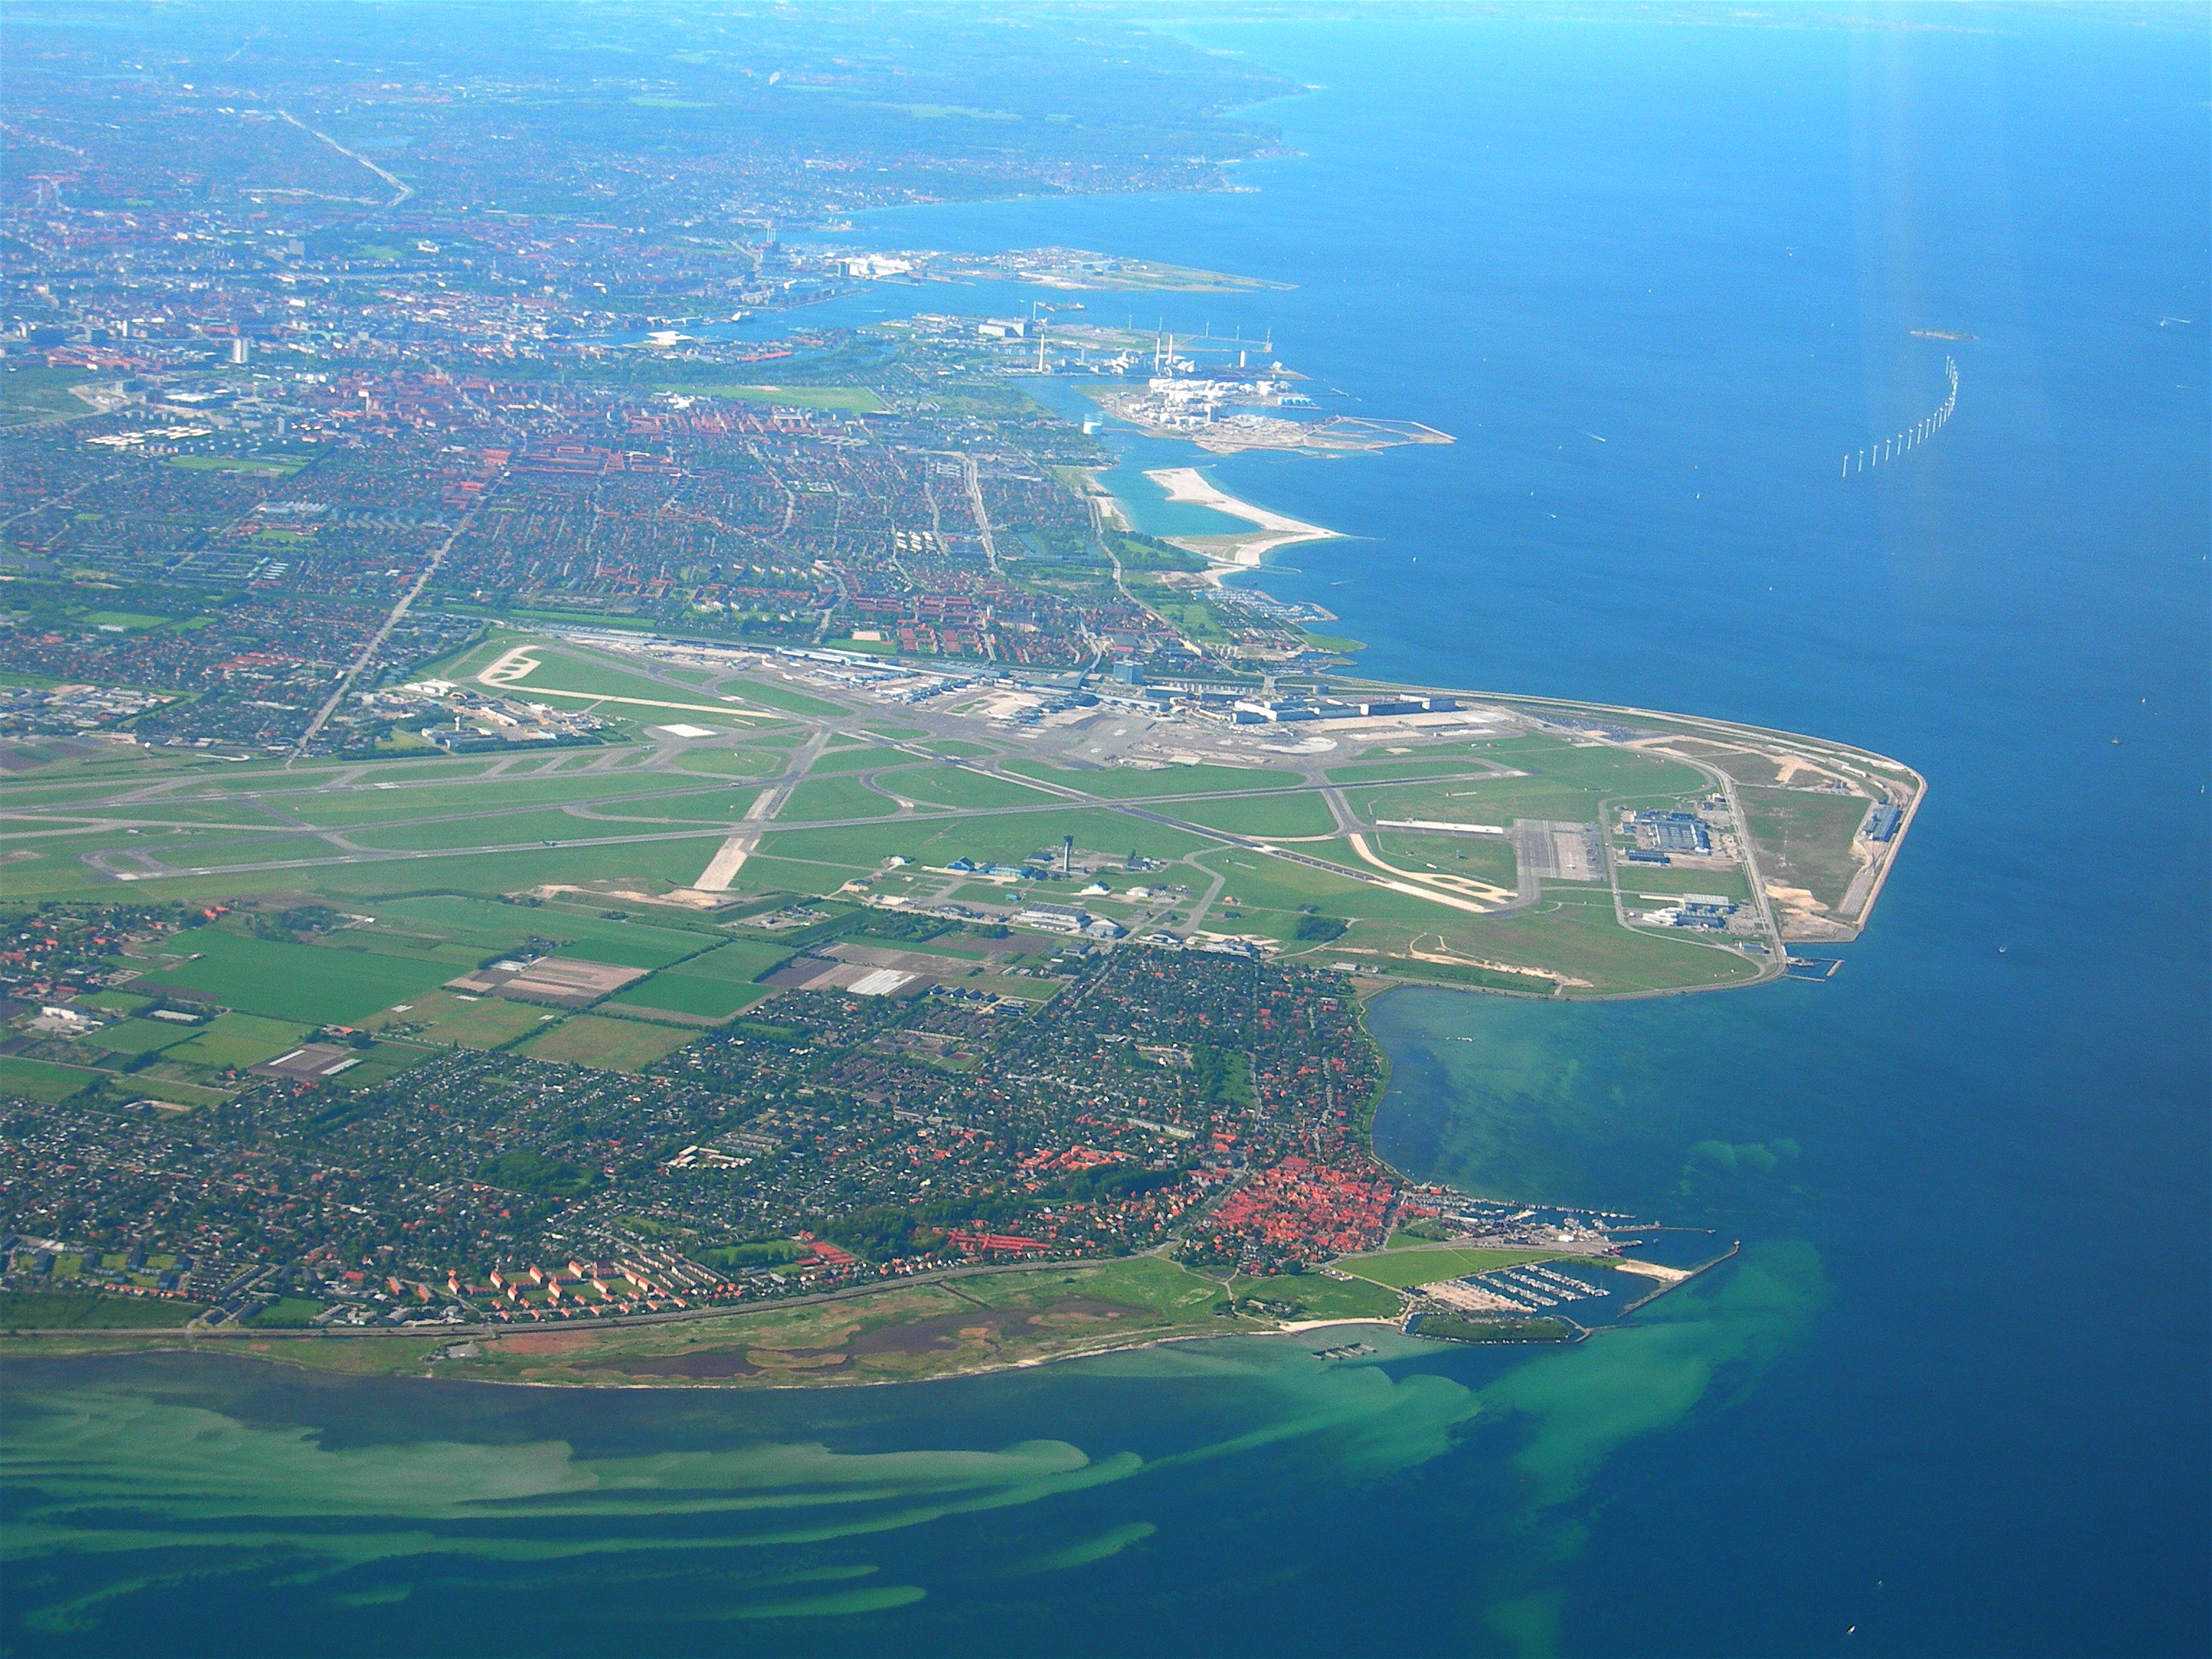 Copenhagen airport and the town of Dragør